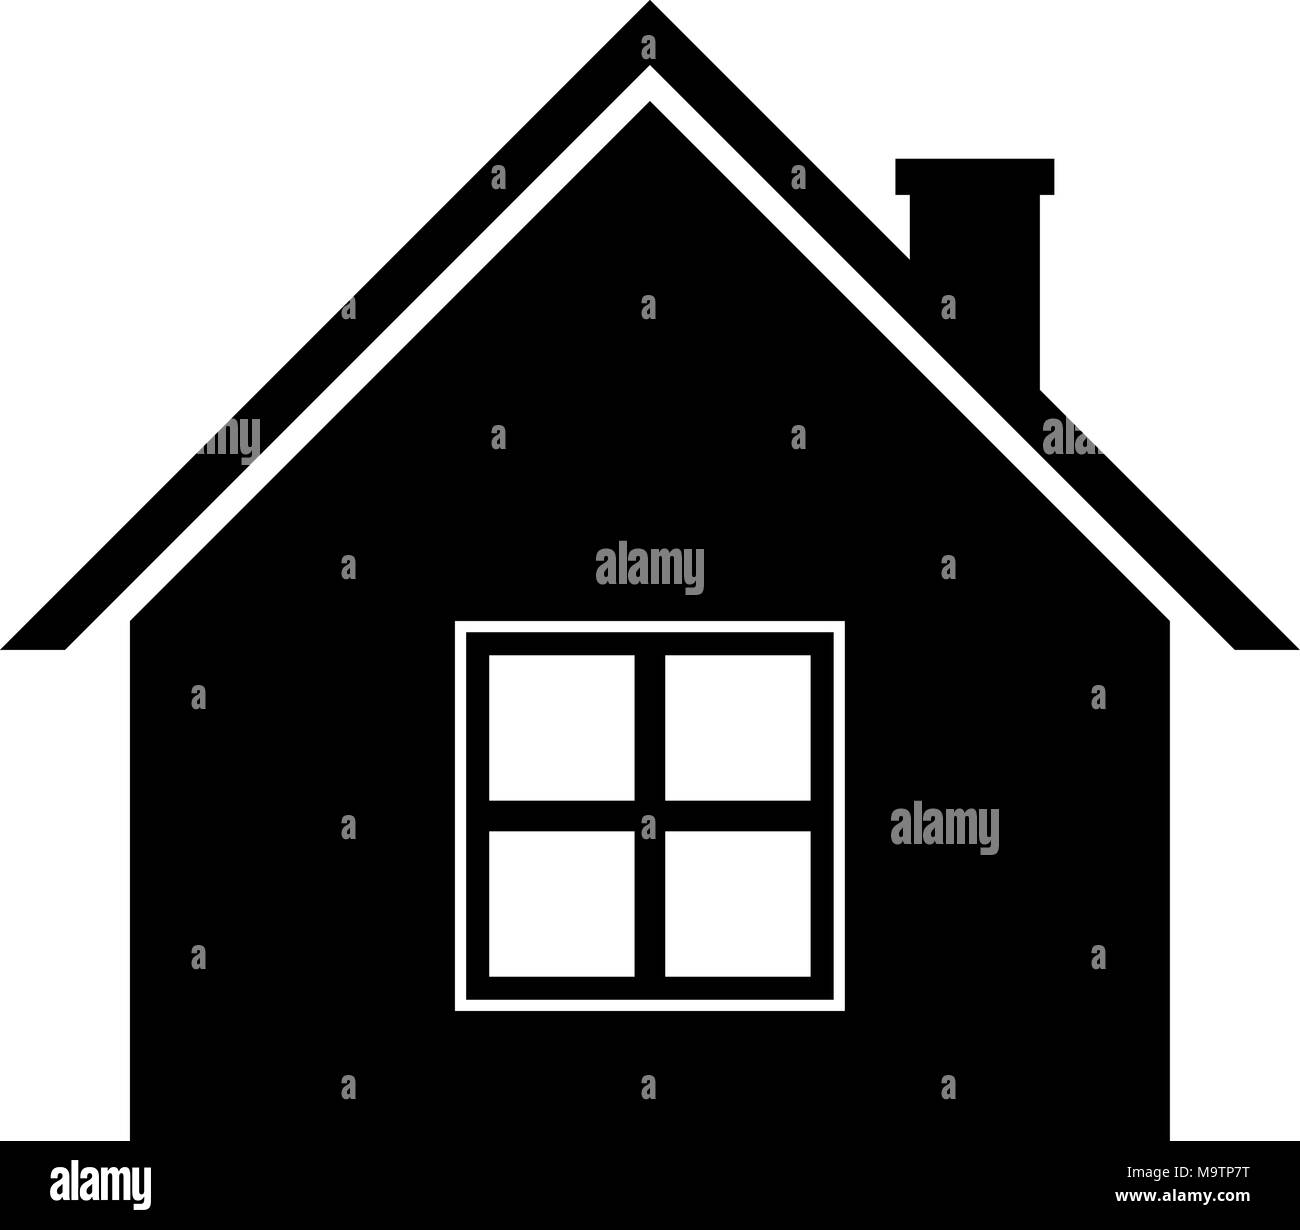 Home icon. Black silhouette symbol of residential house Stock Vector ...